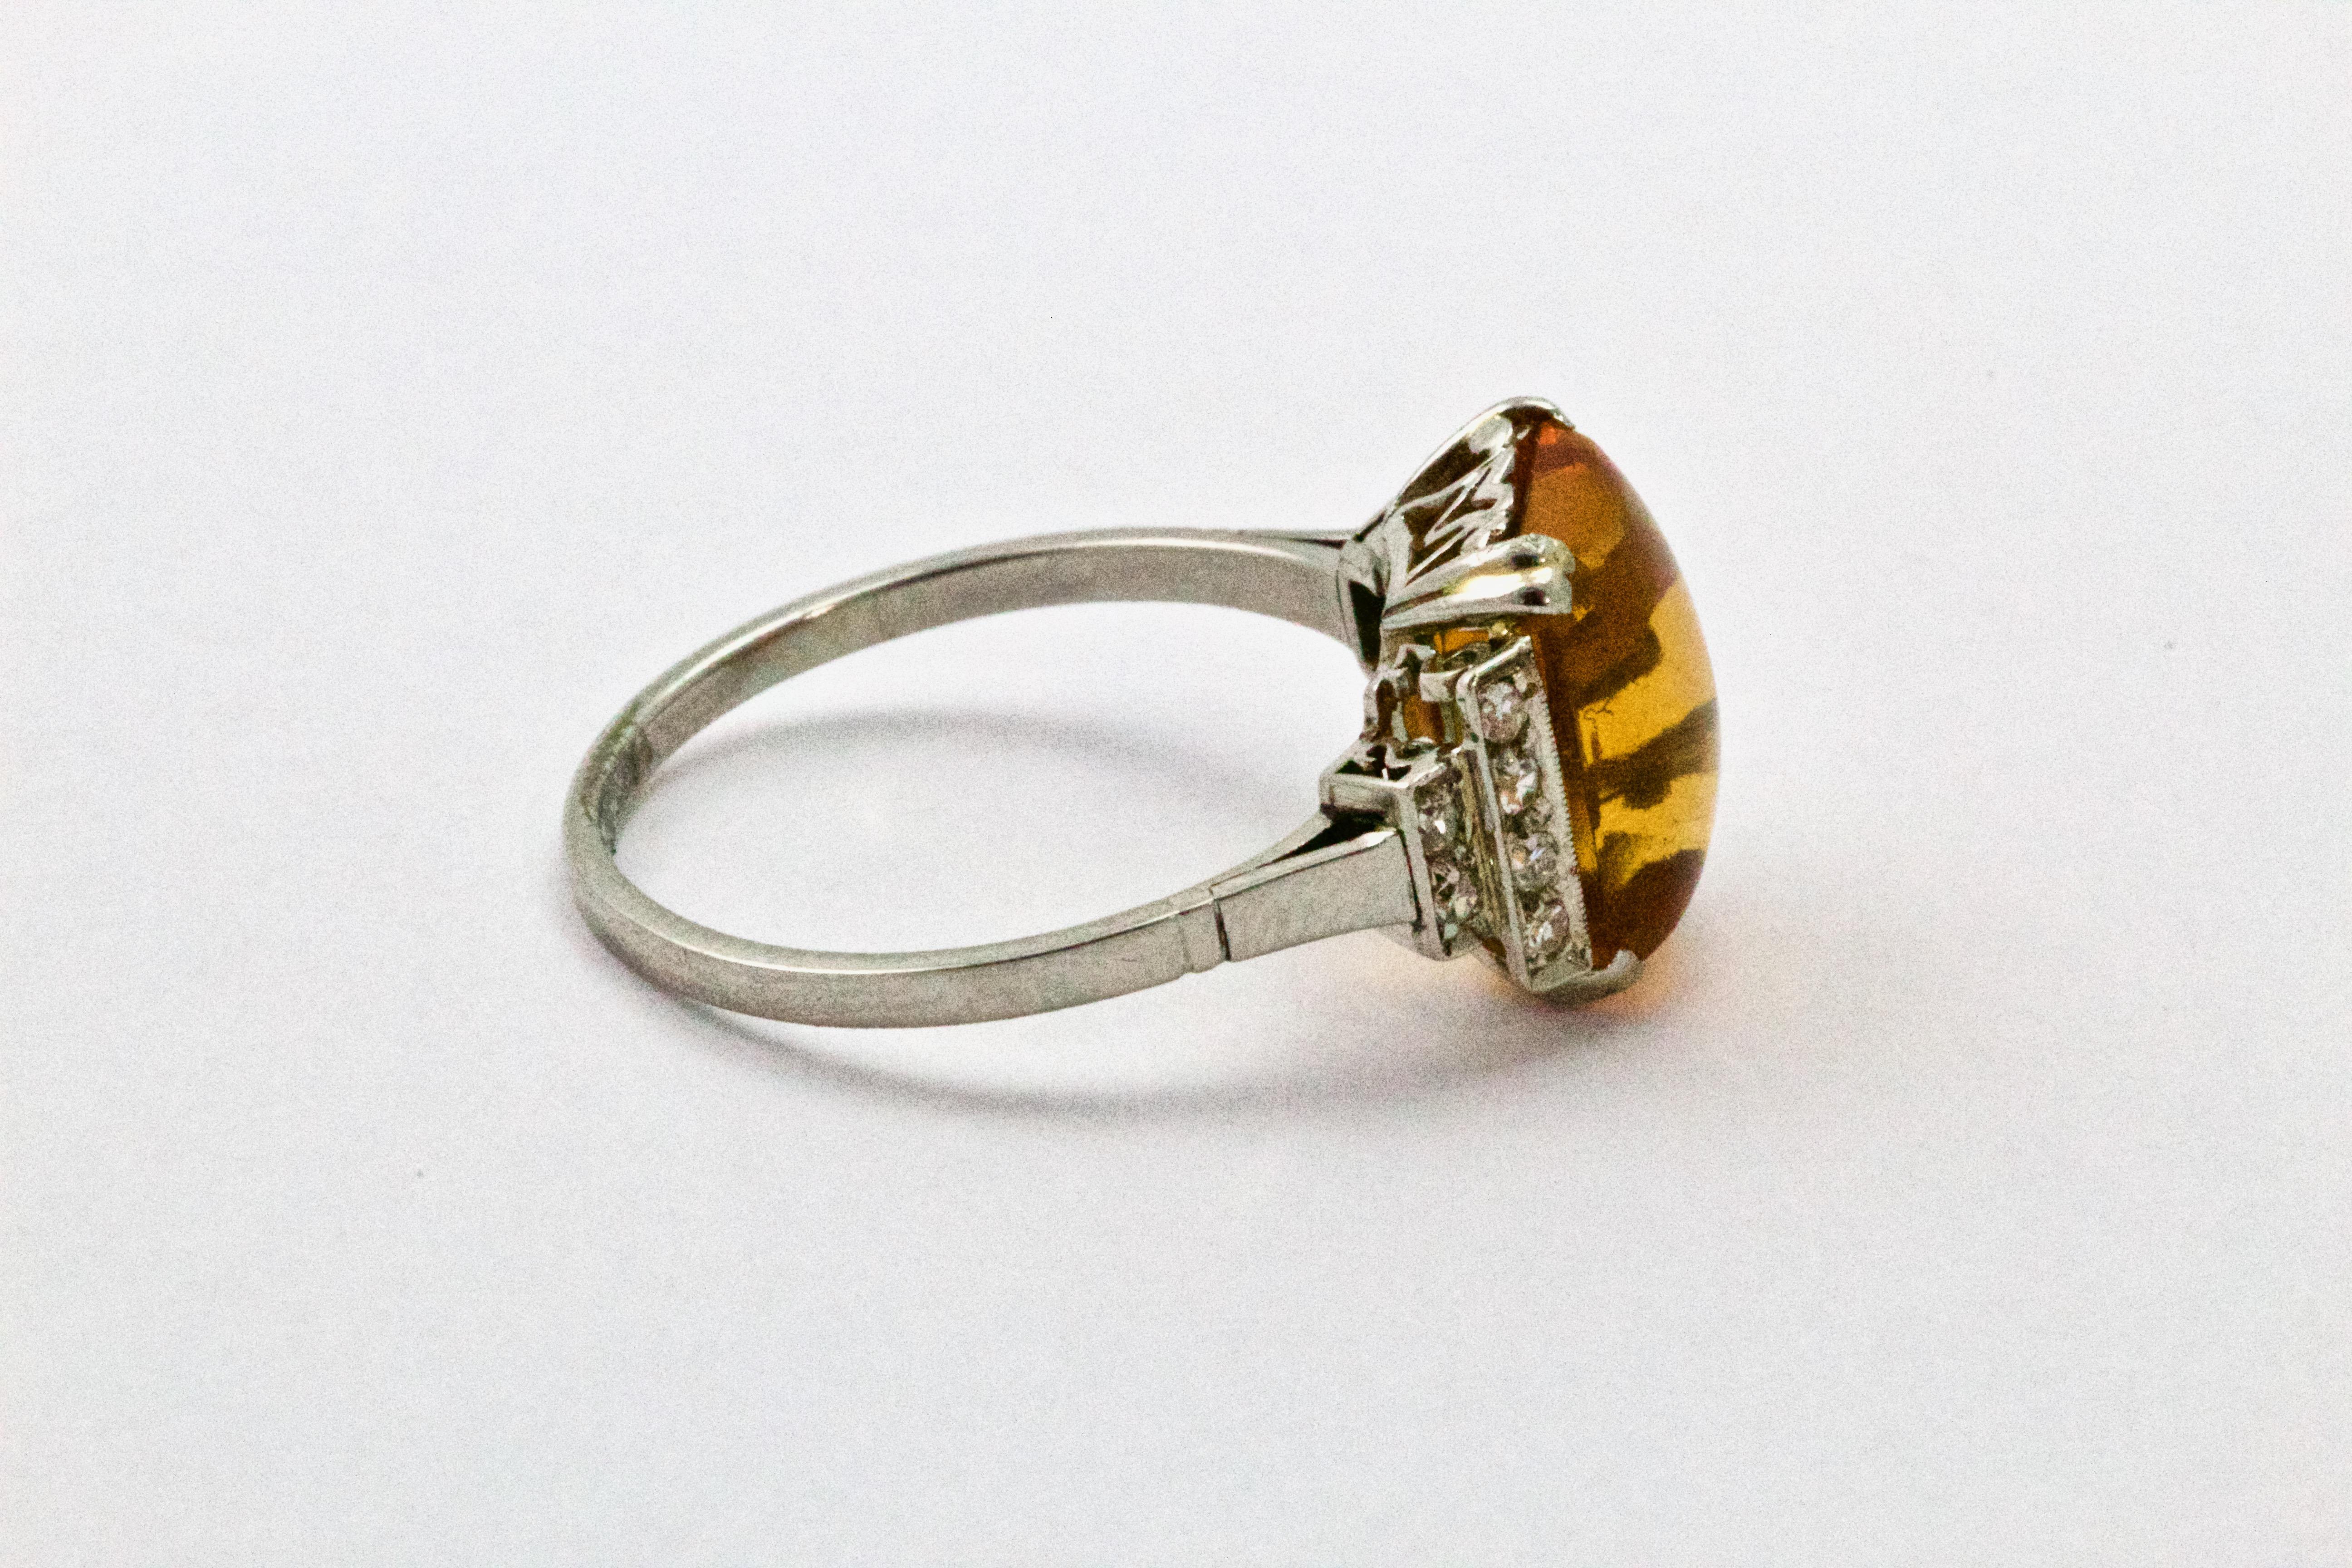 A Stunning example of an Art Deco cabochon Citrine ring, flanked with diamond stepped shoulders, modelled in platinum throughout with simple track embellishment to the band.

Ring Size: Q or 8 

Weight: 4.4 grams